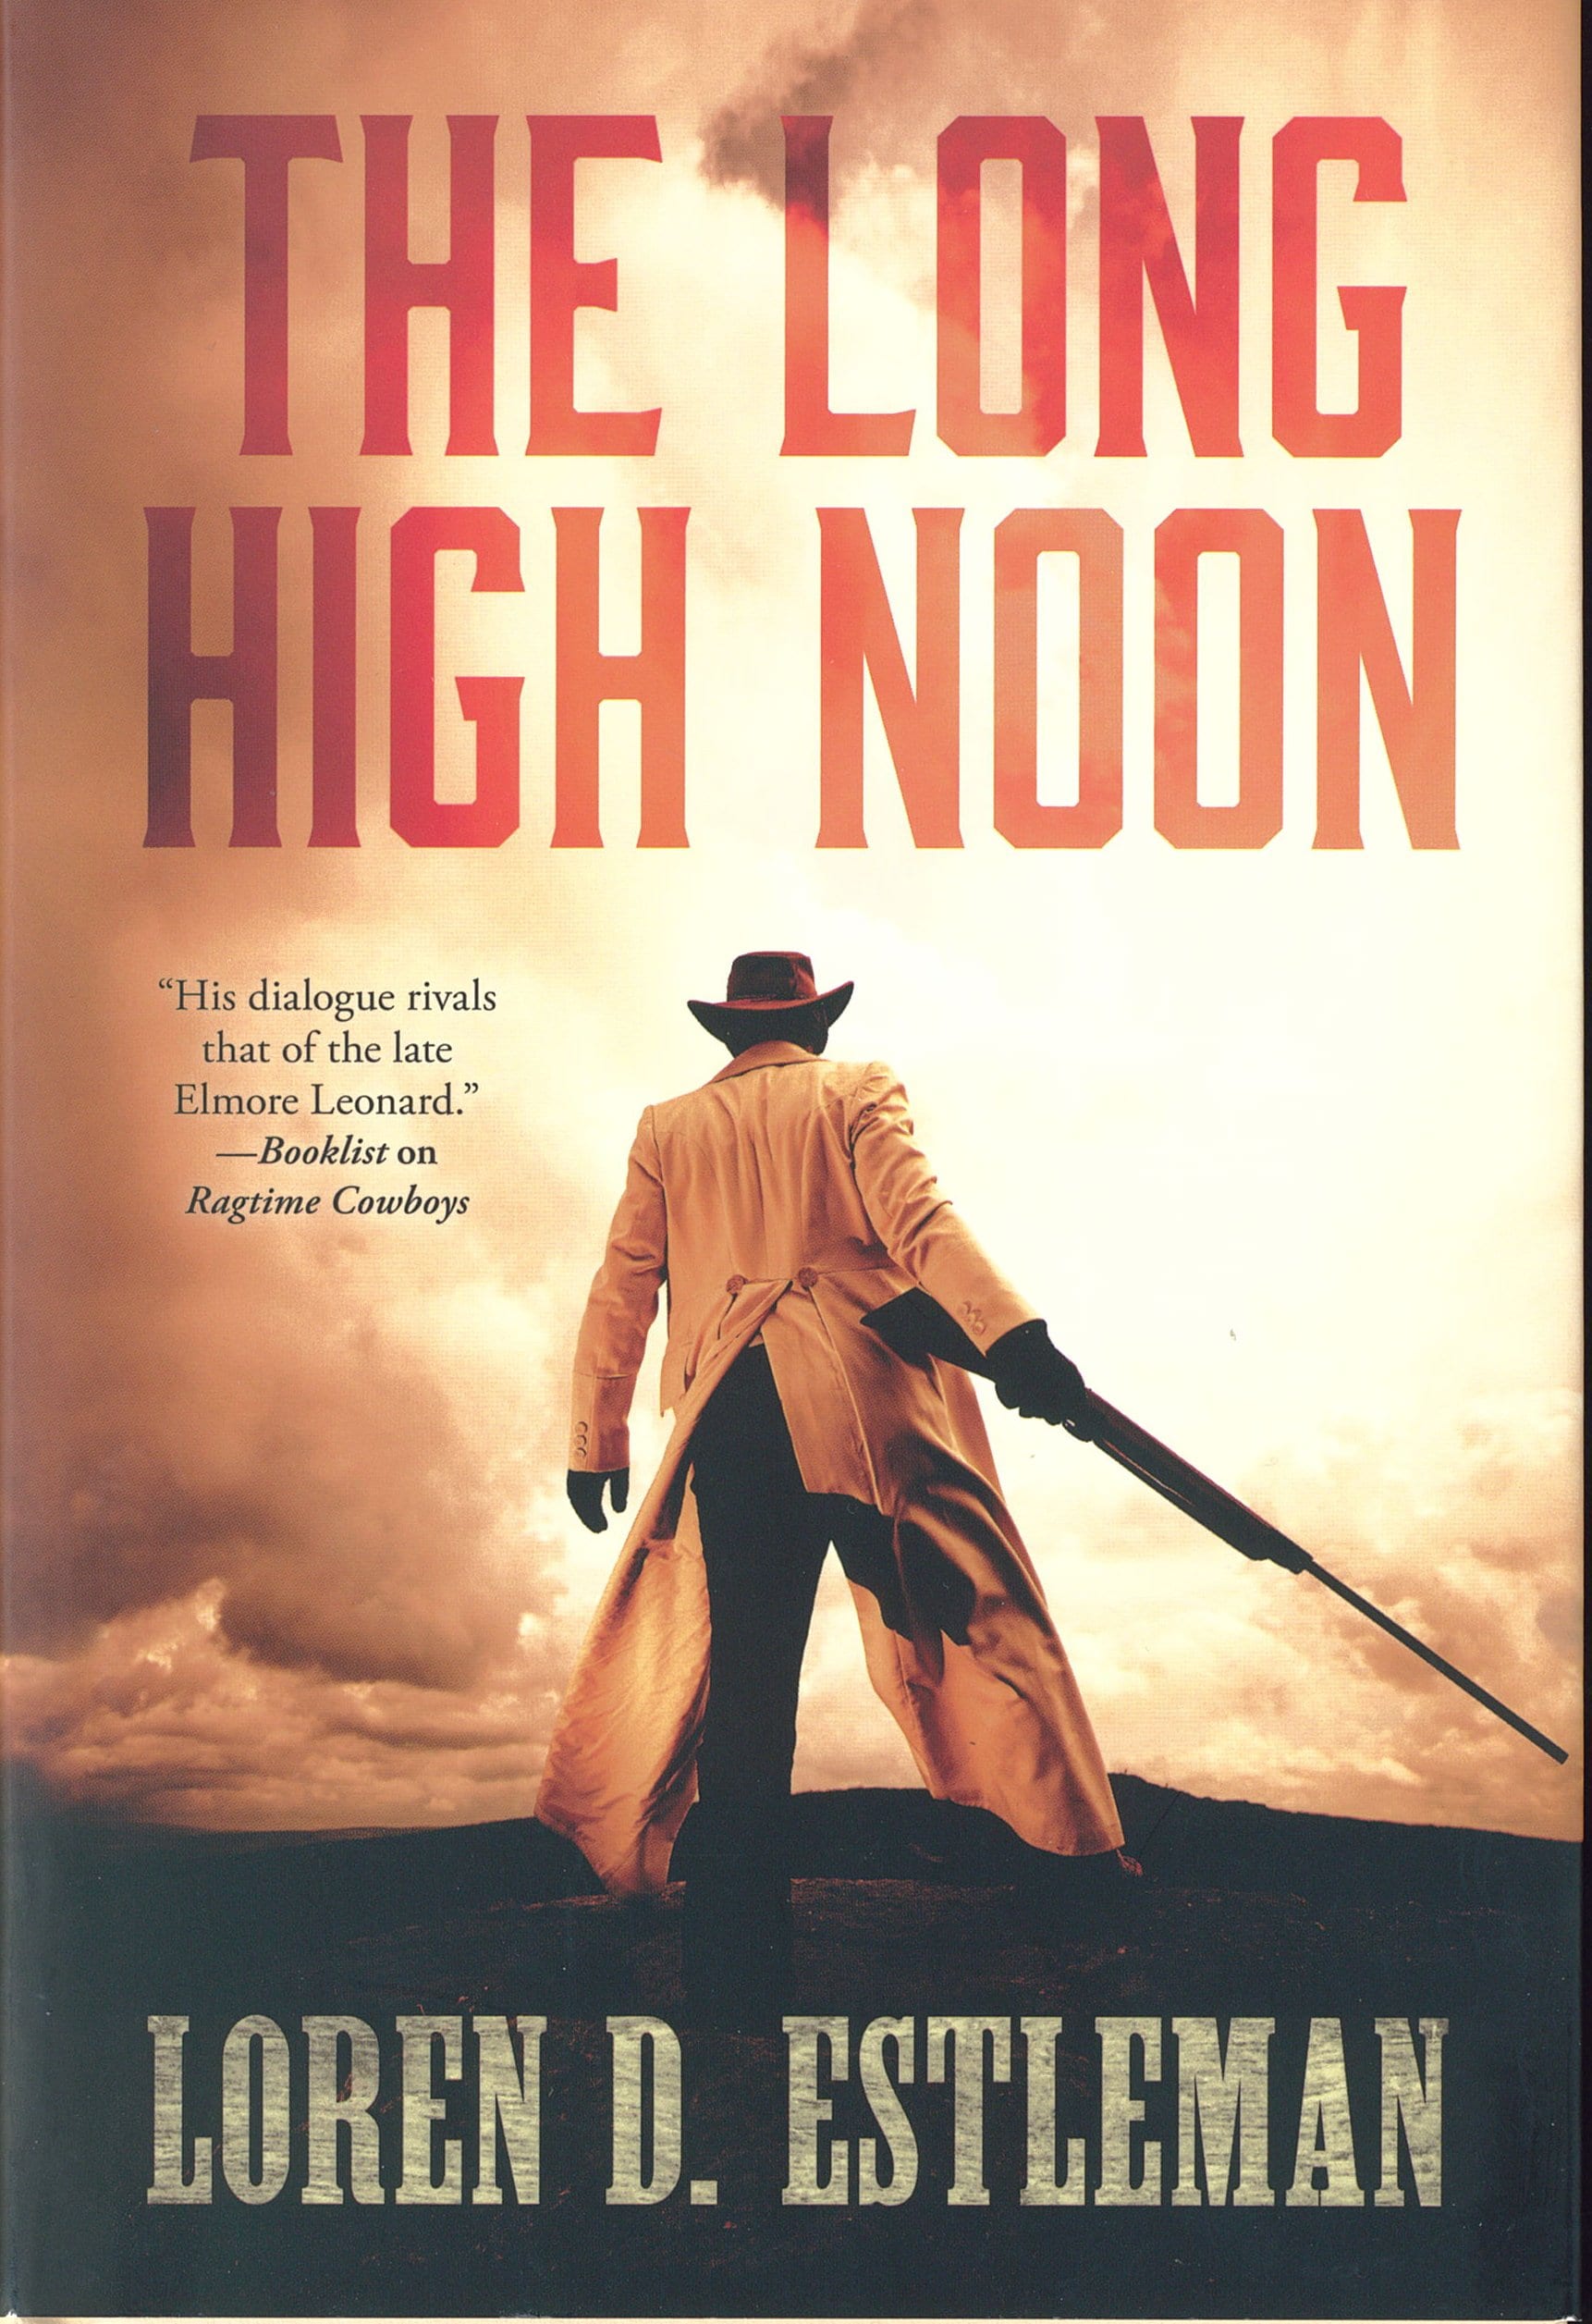 The Long High Noon